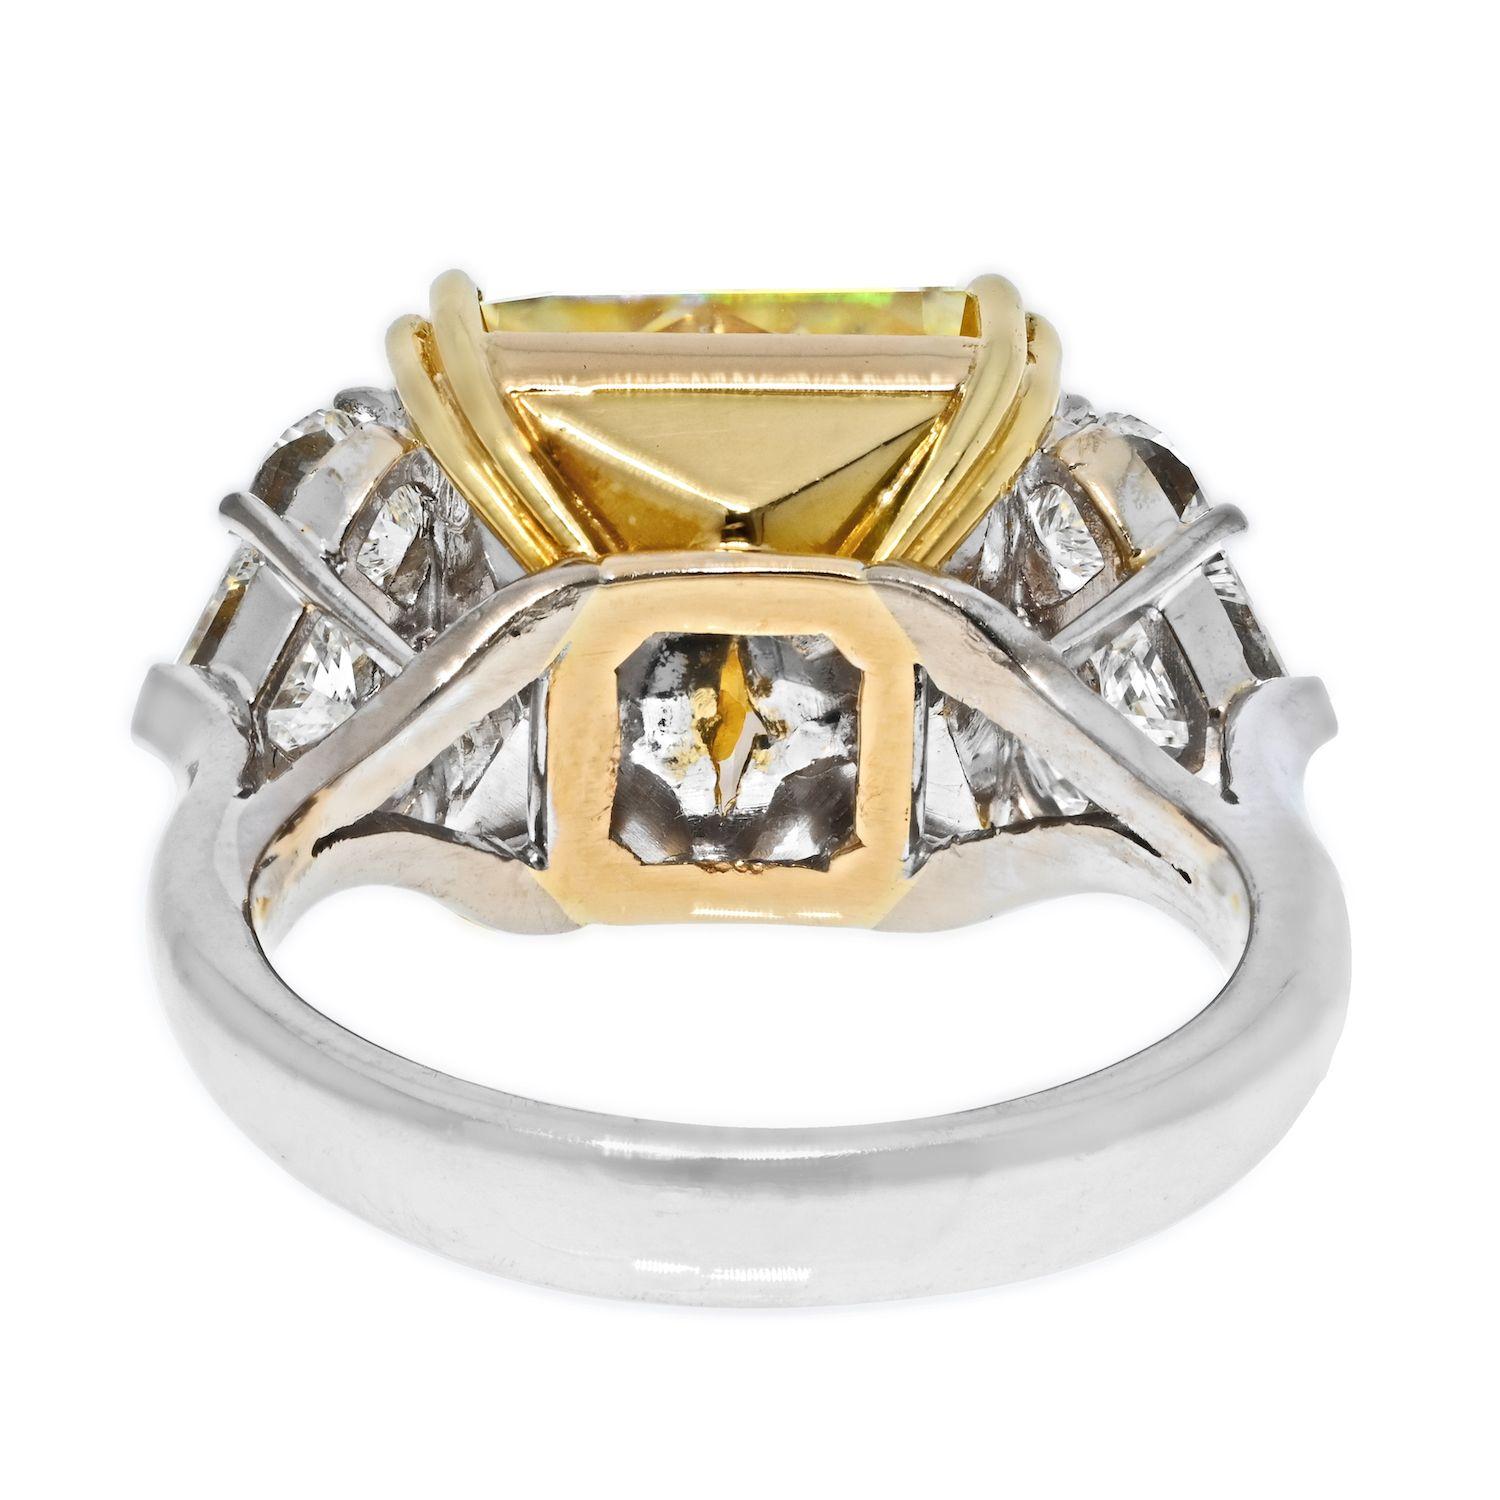 12.96 Carat Radiant Cut Diamond Fancy Yellow SI1 GIA Engagement Ring In Excellent Condition For Sale In New York, NY